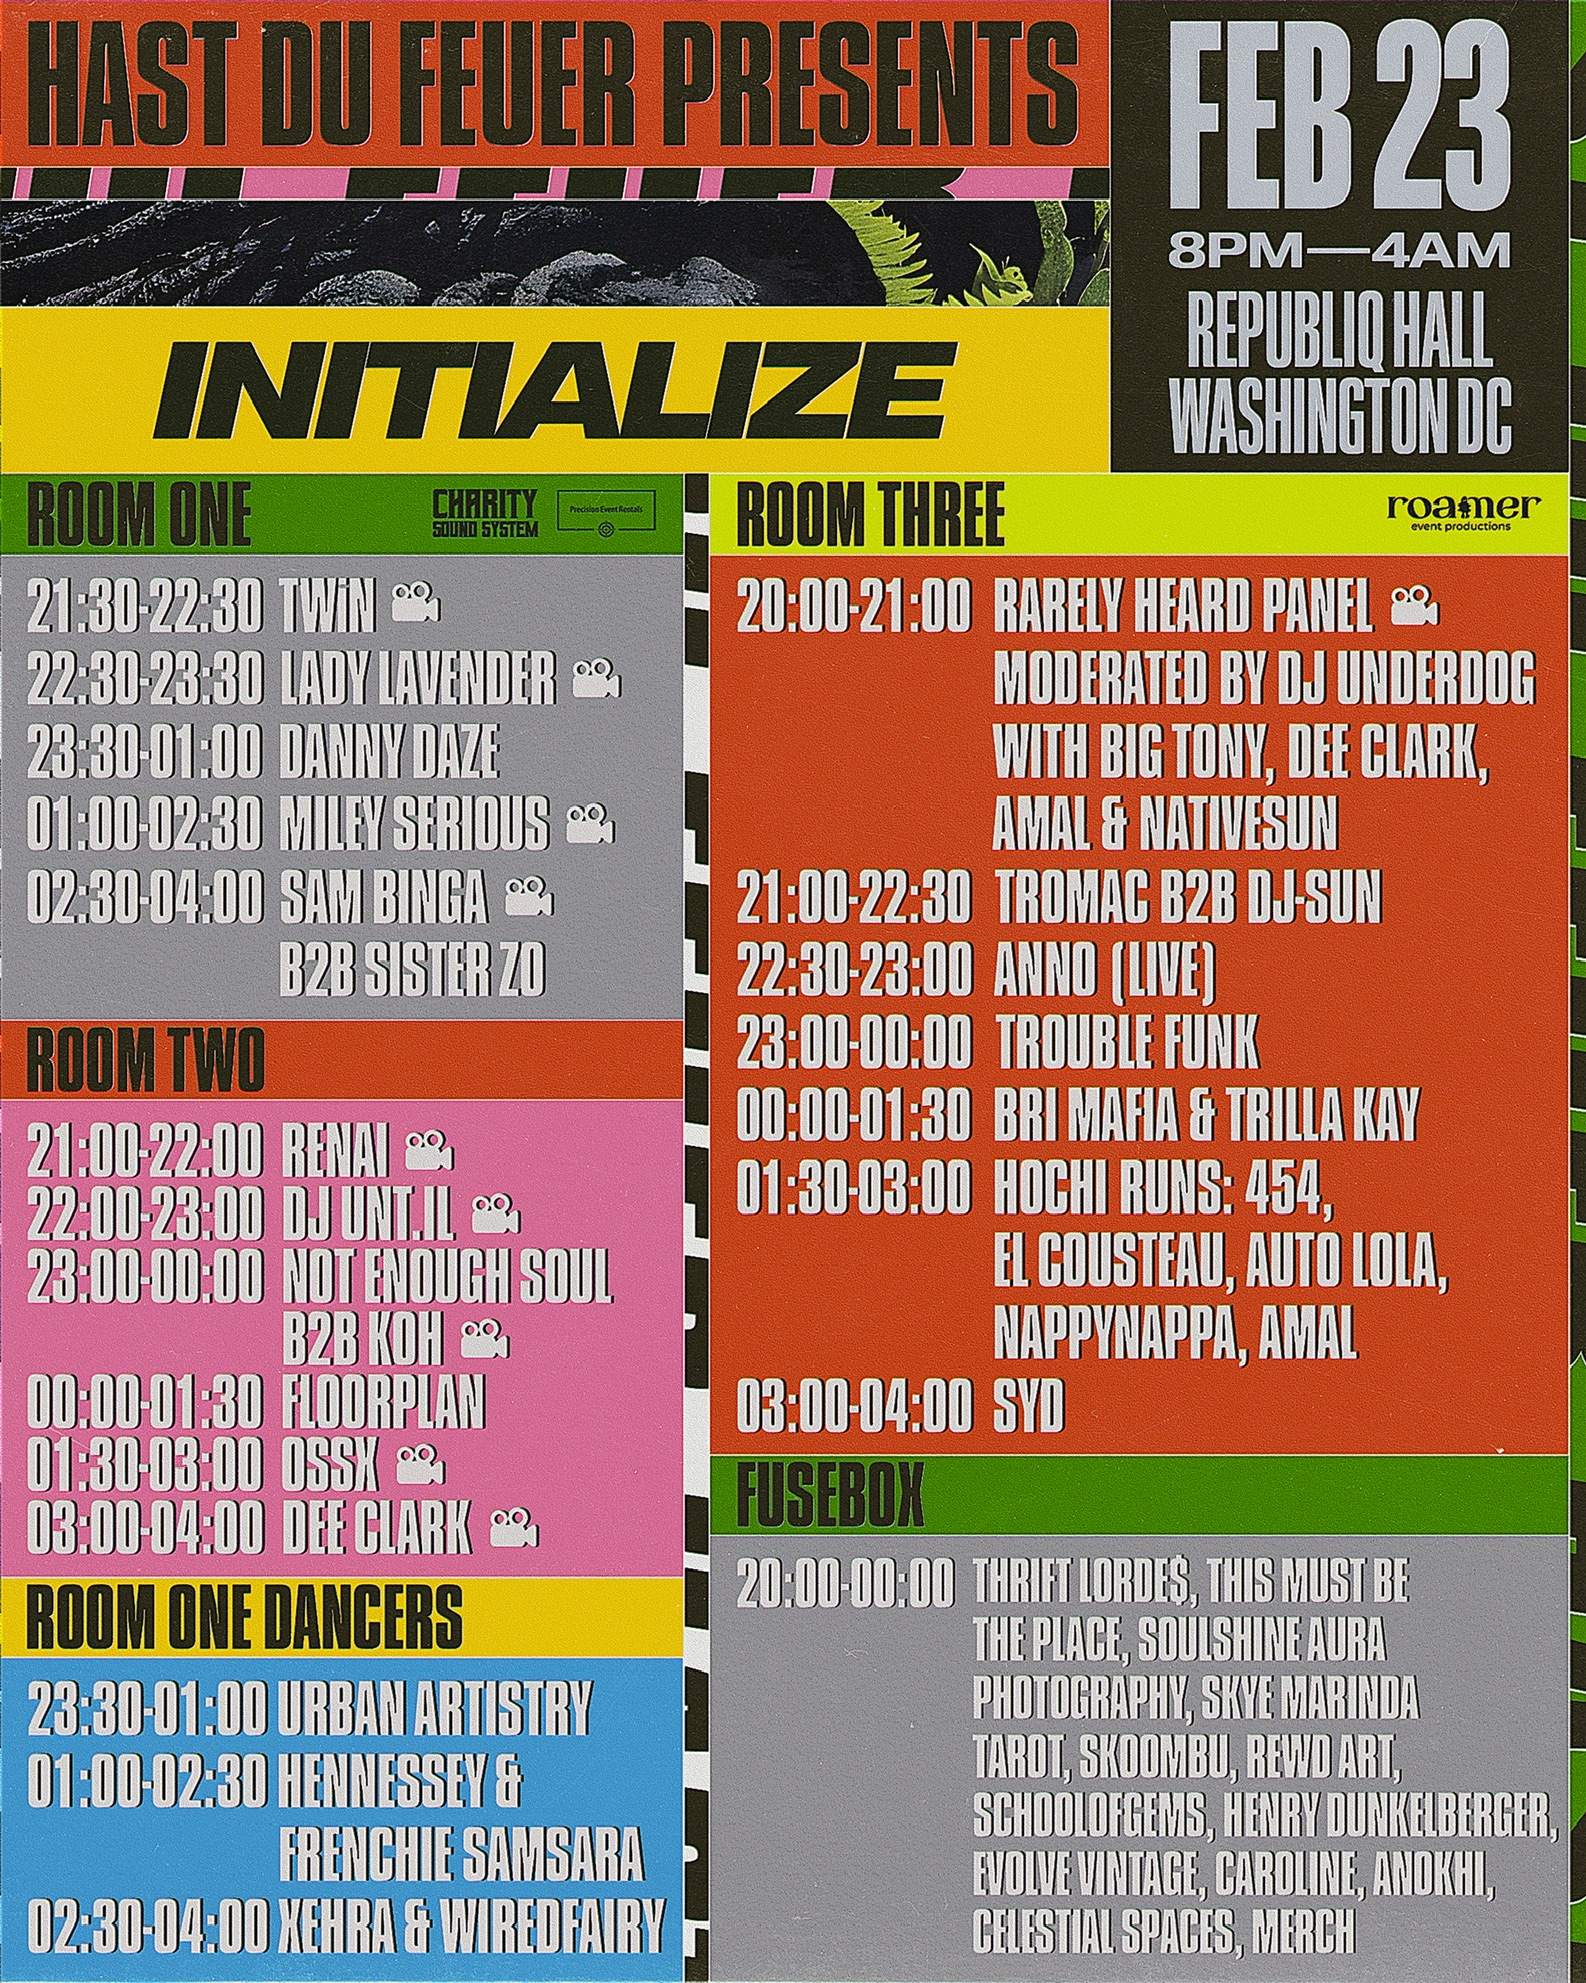 Hast du Feuer presents INITIALIZE: Floorplan, Trouble Funk & 30 more acts - フライヤー裏